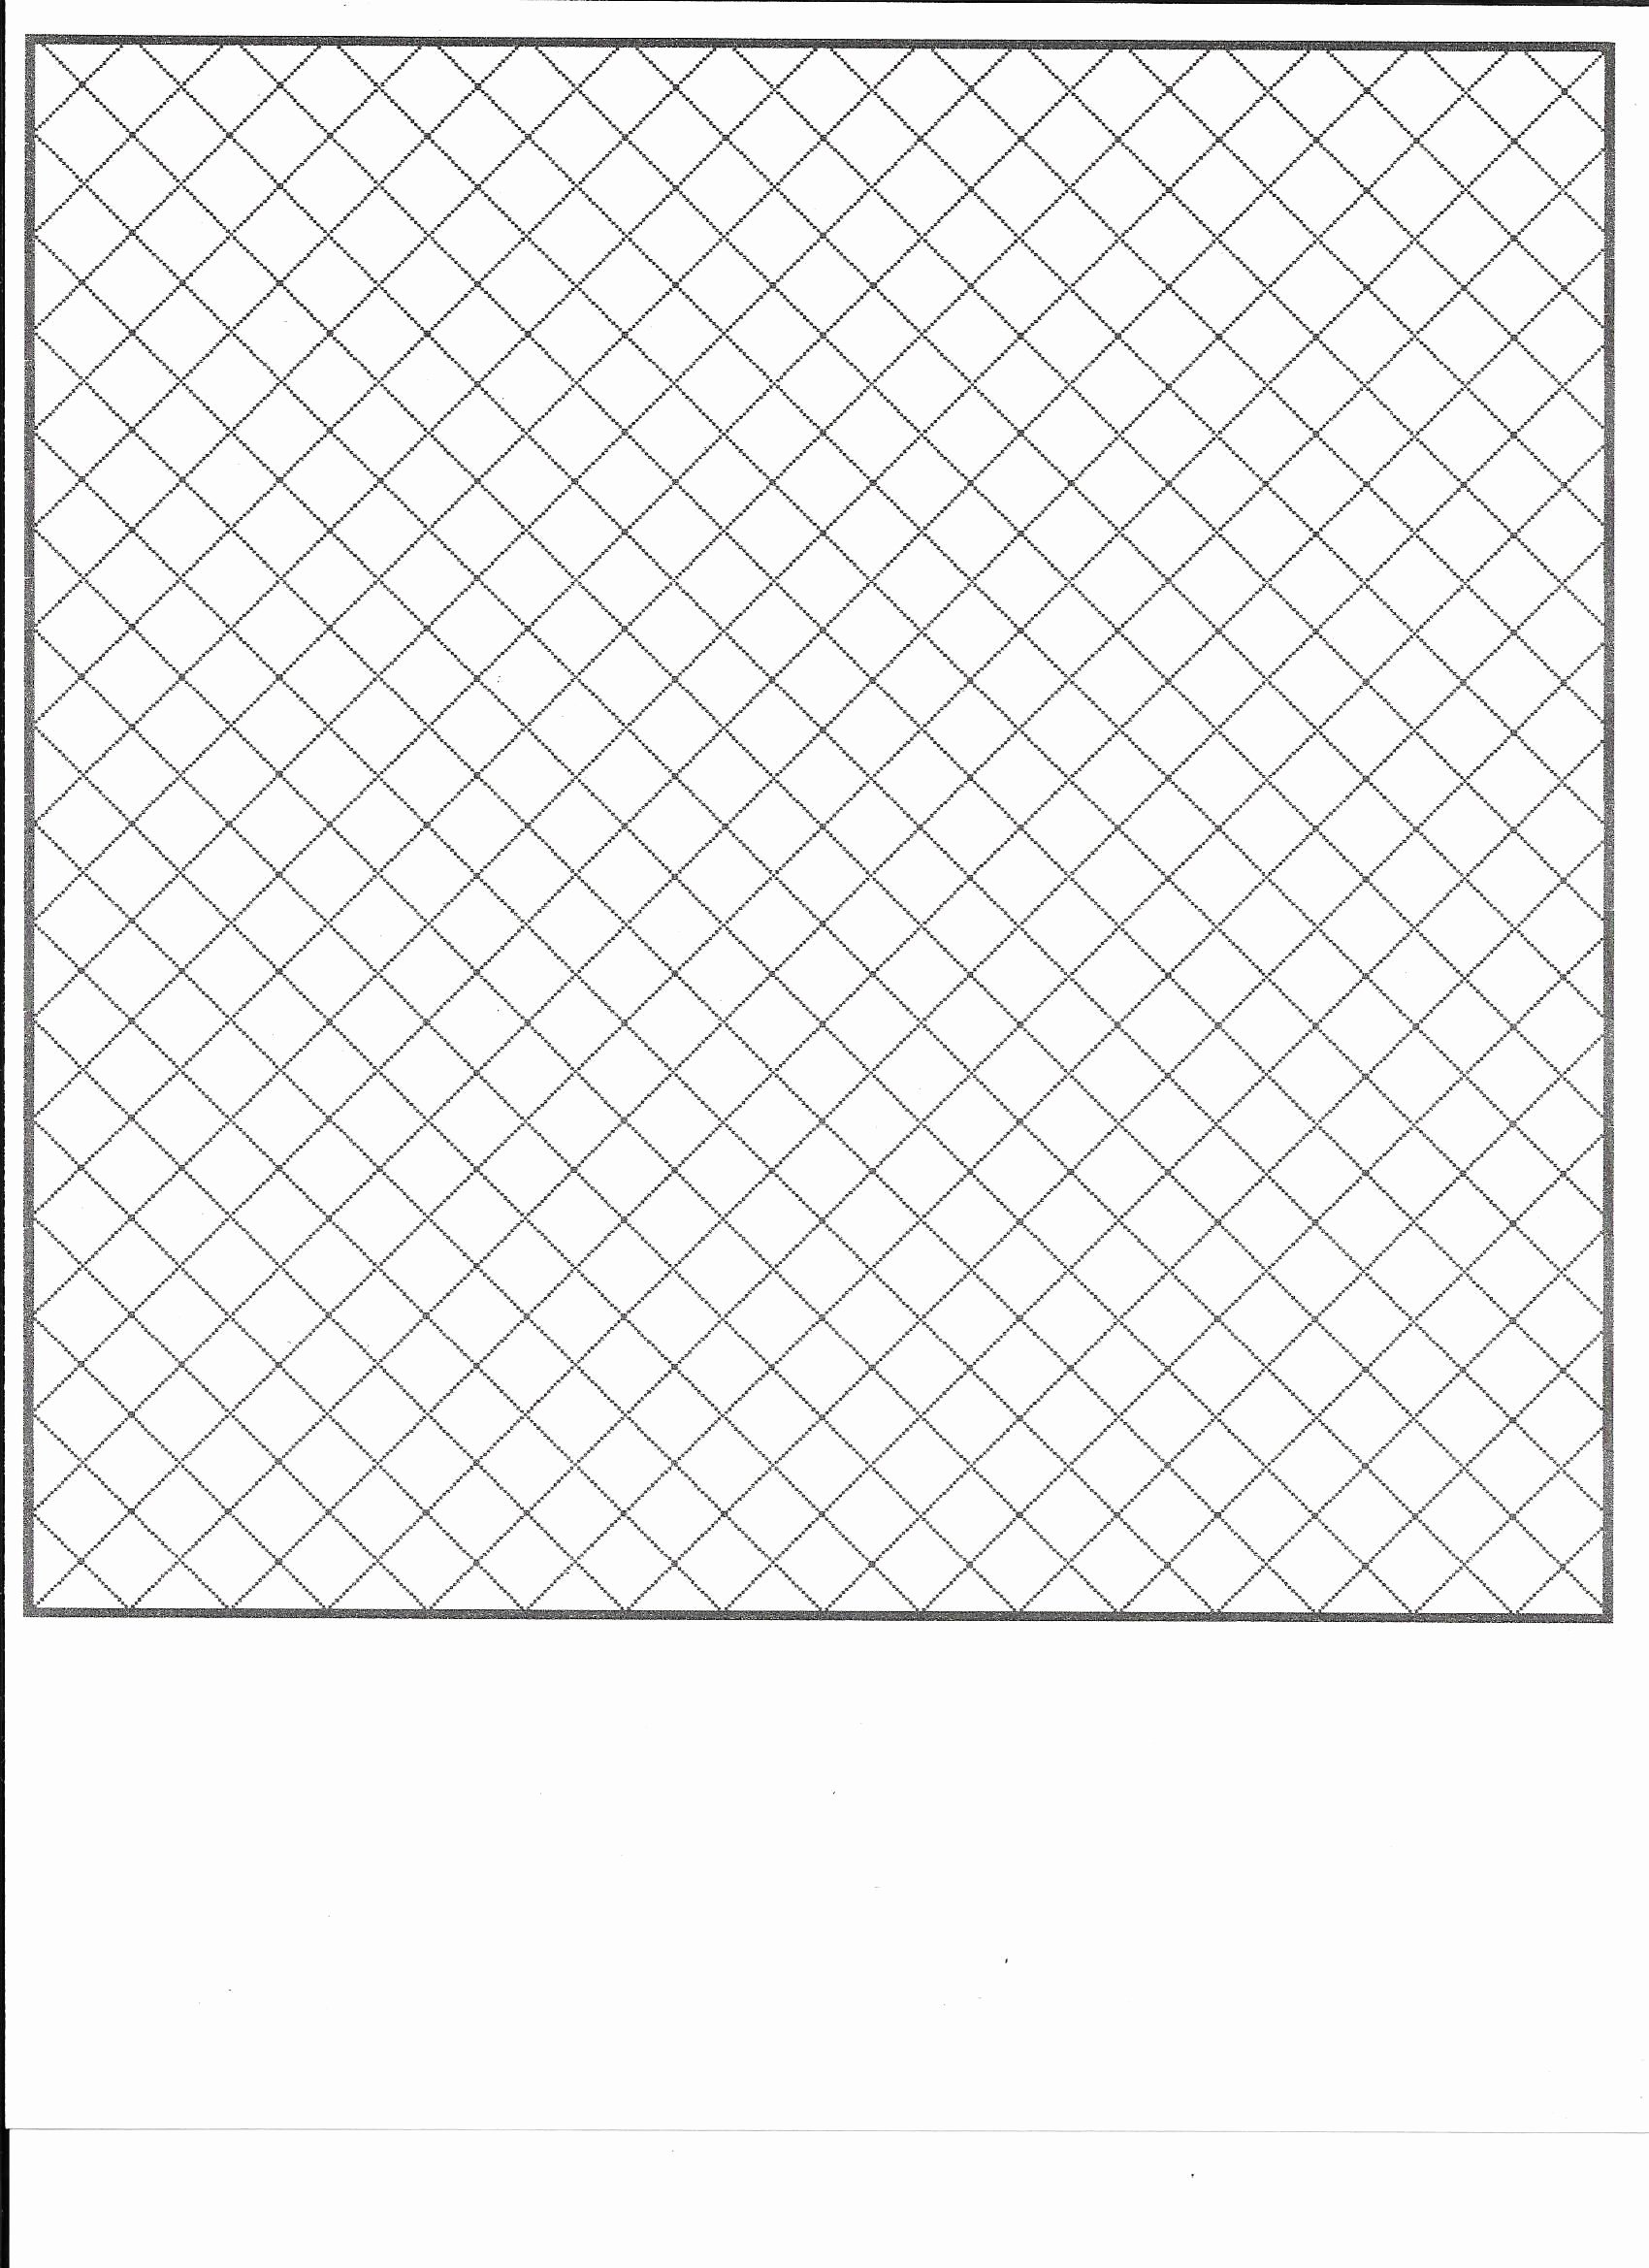 Big Square Graph Paper Luxury Diagonal Squares On Point Graph Paper if You Like to Map